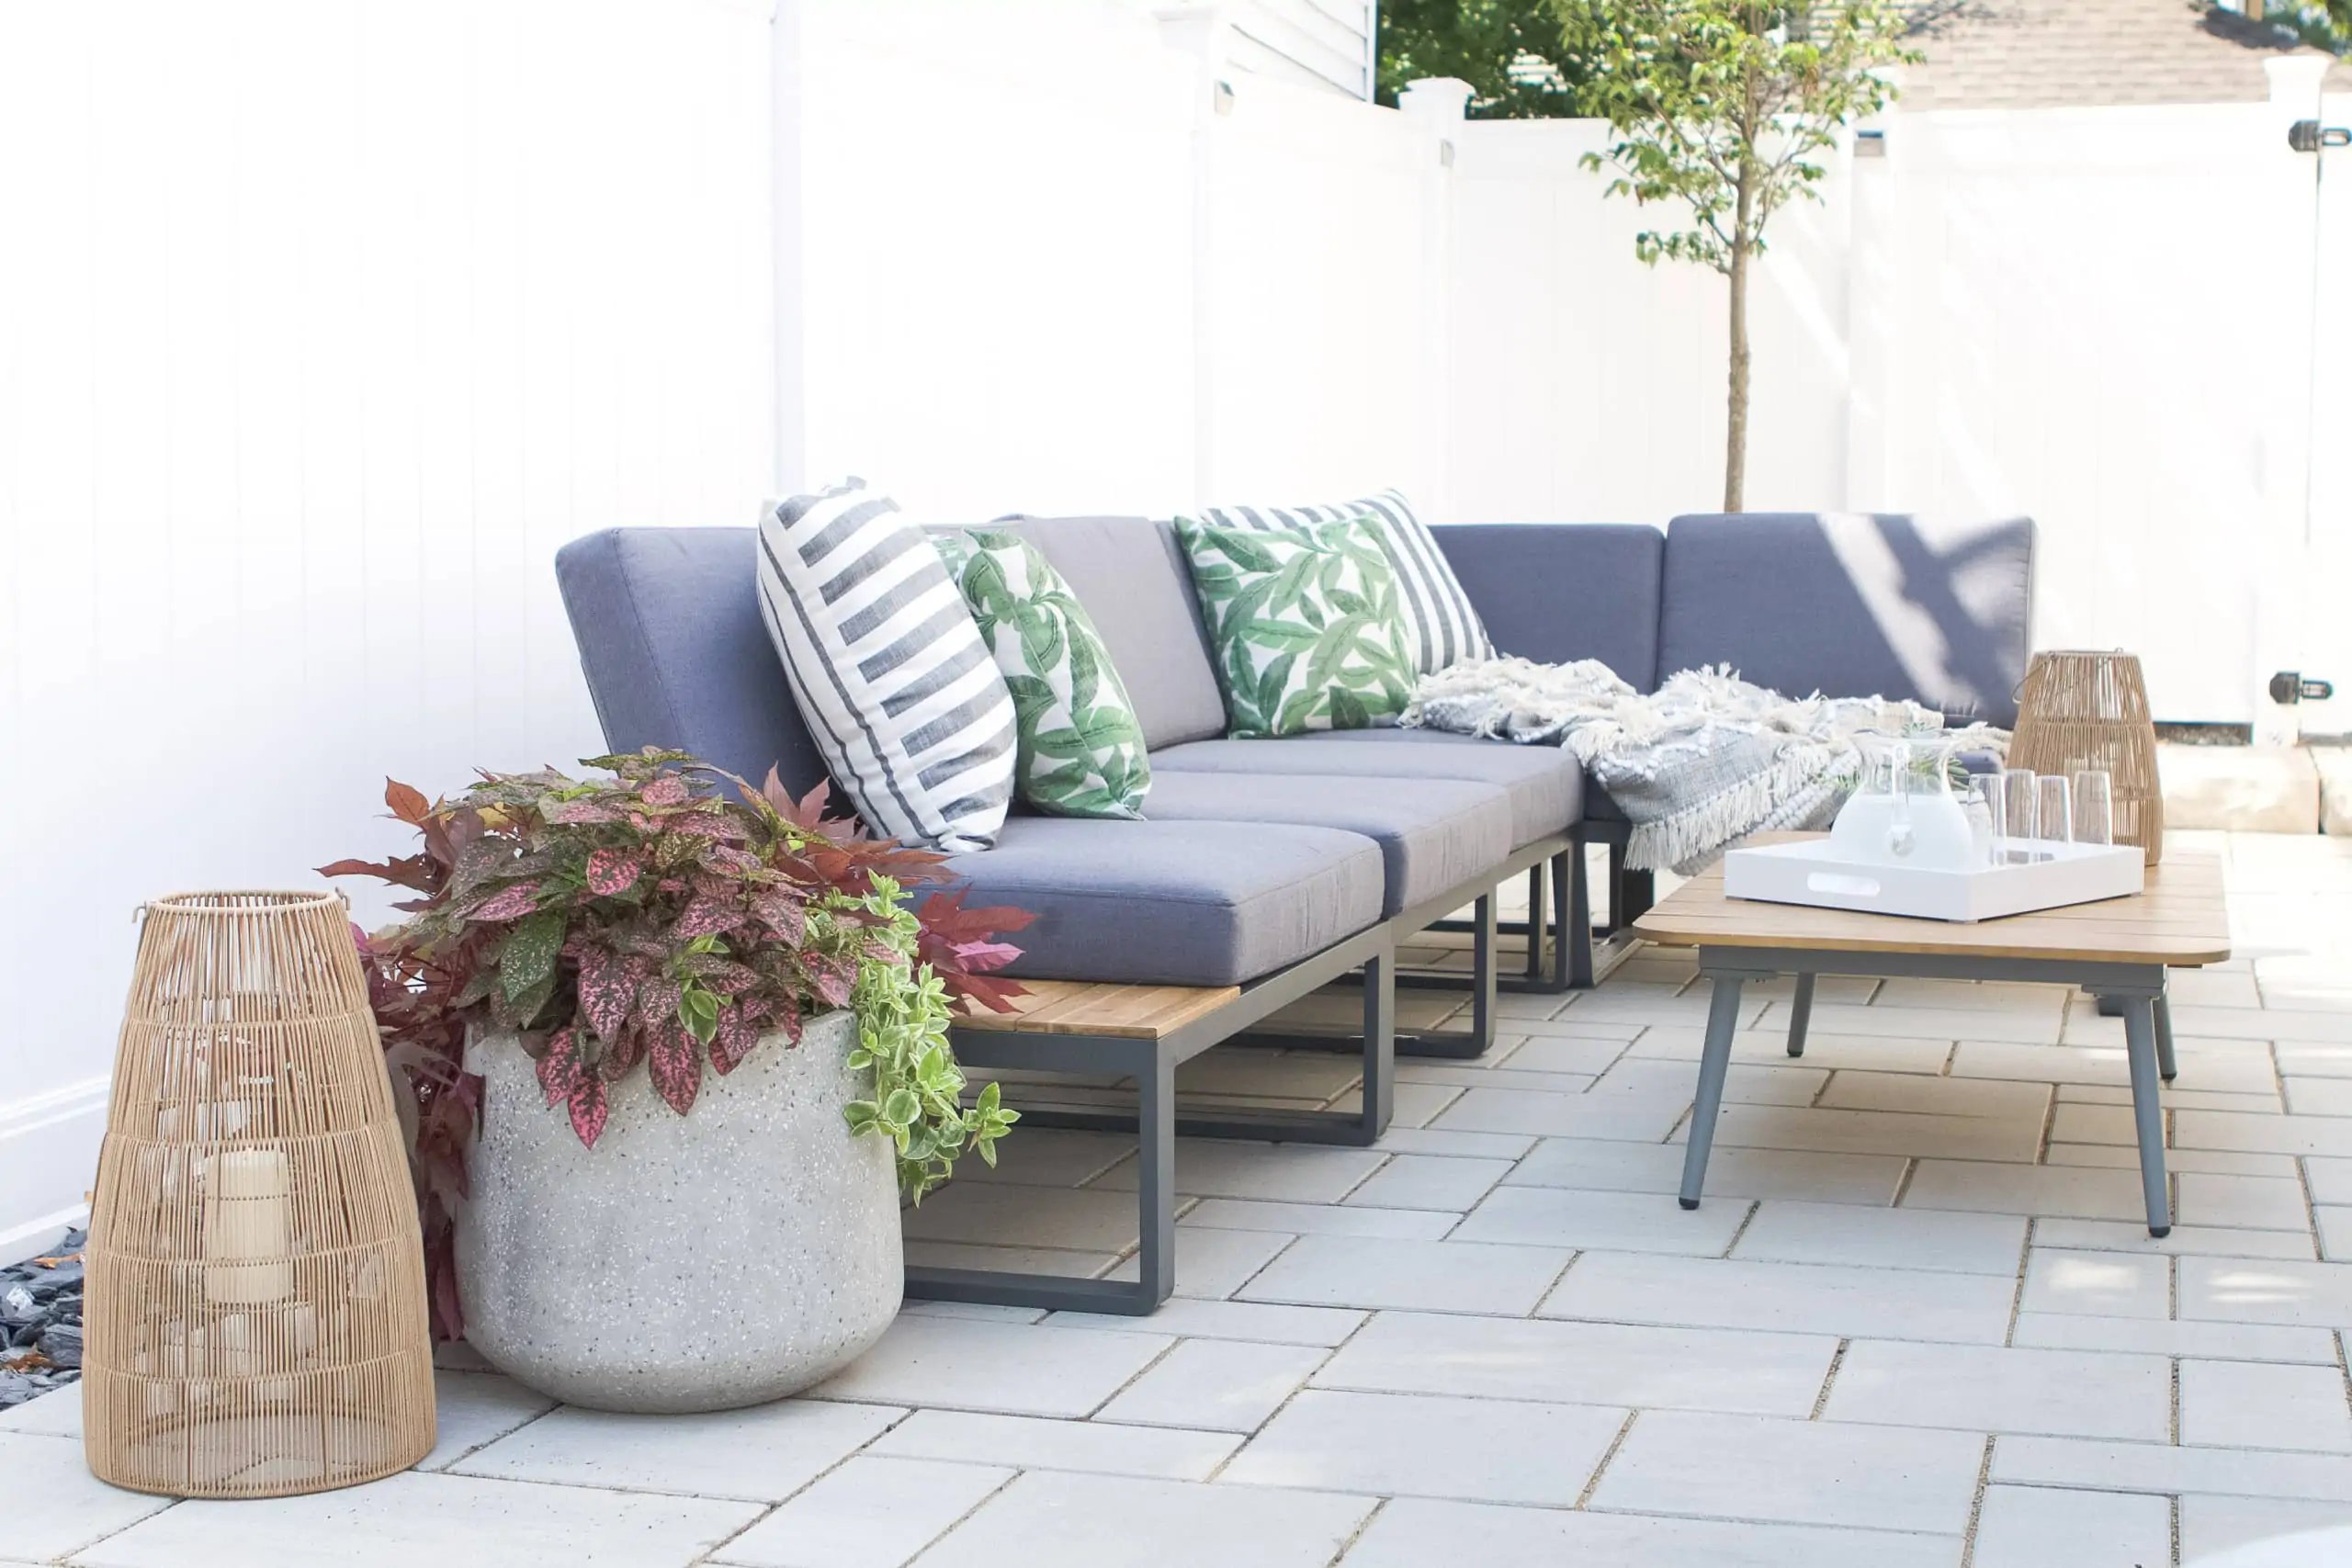 Our new outdoor sectional from Article